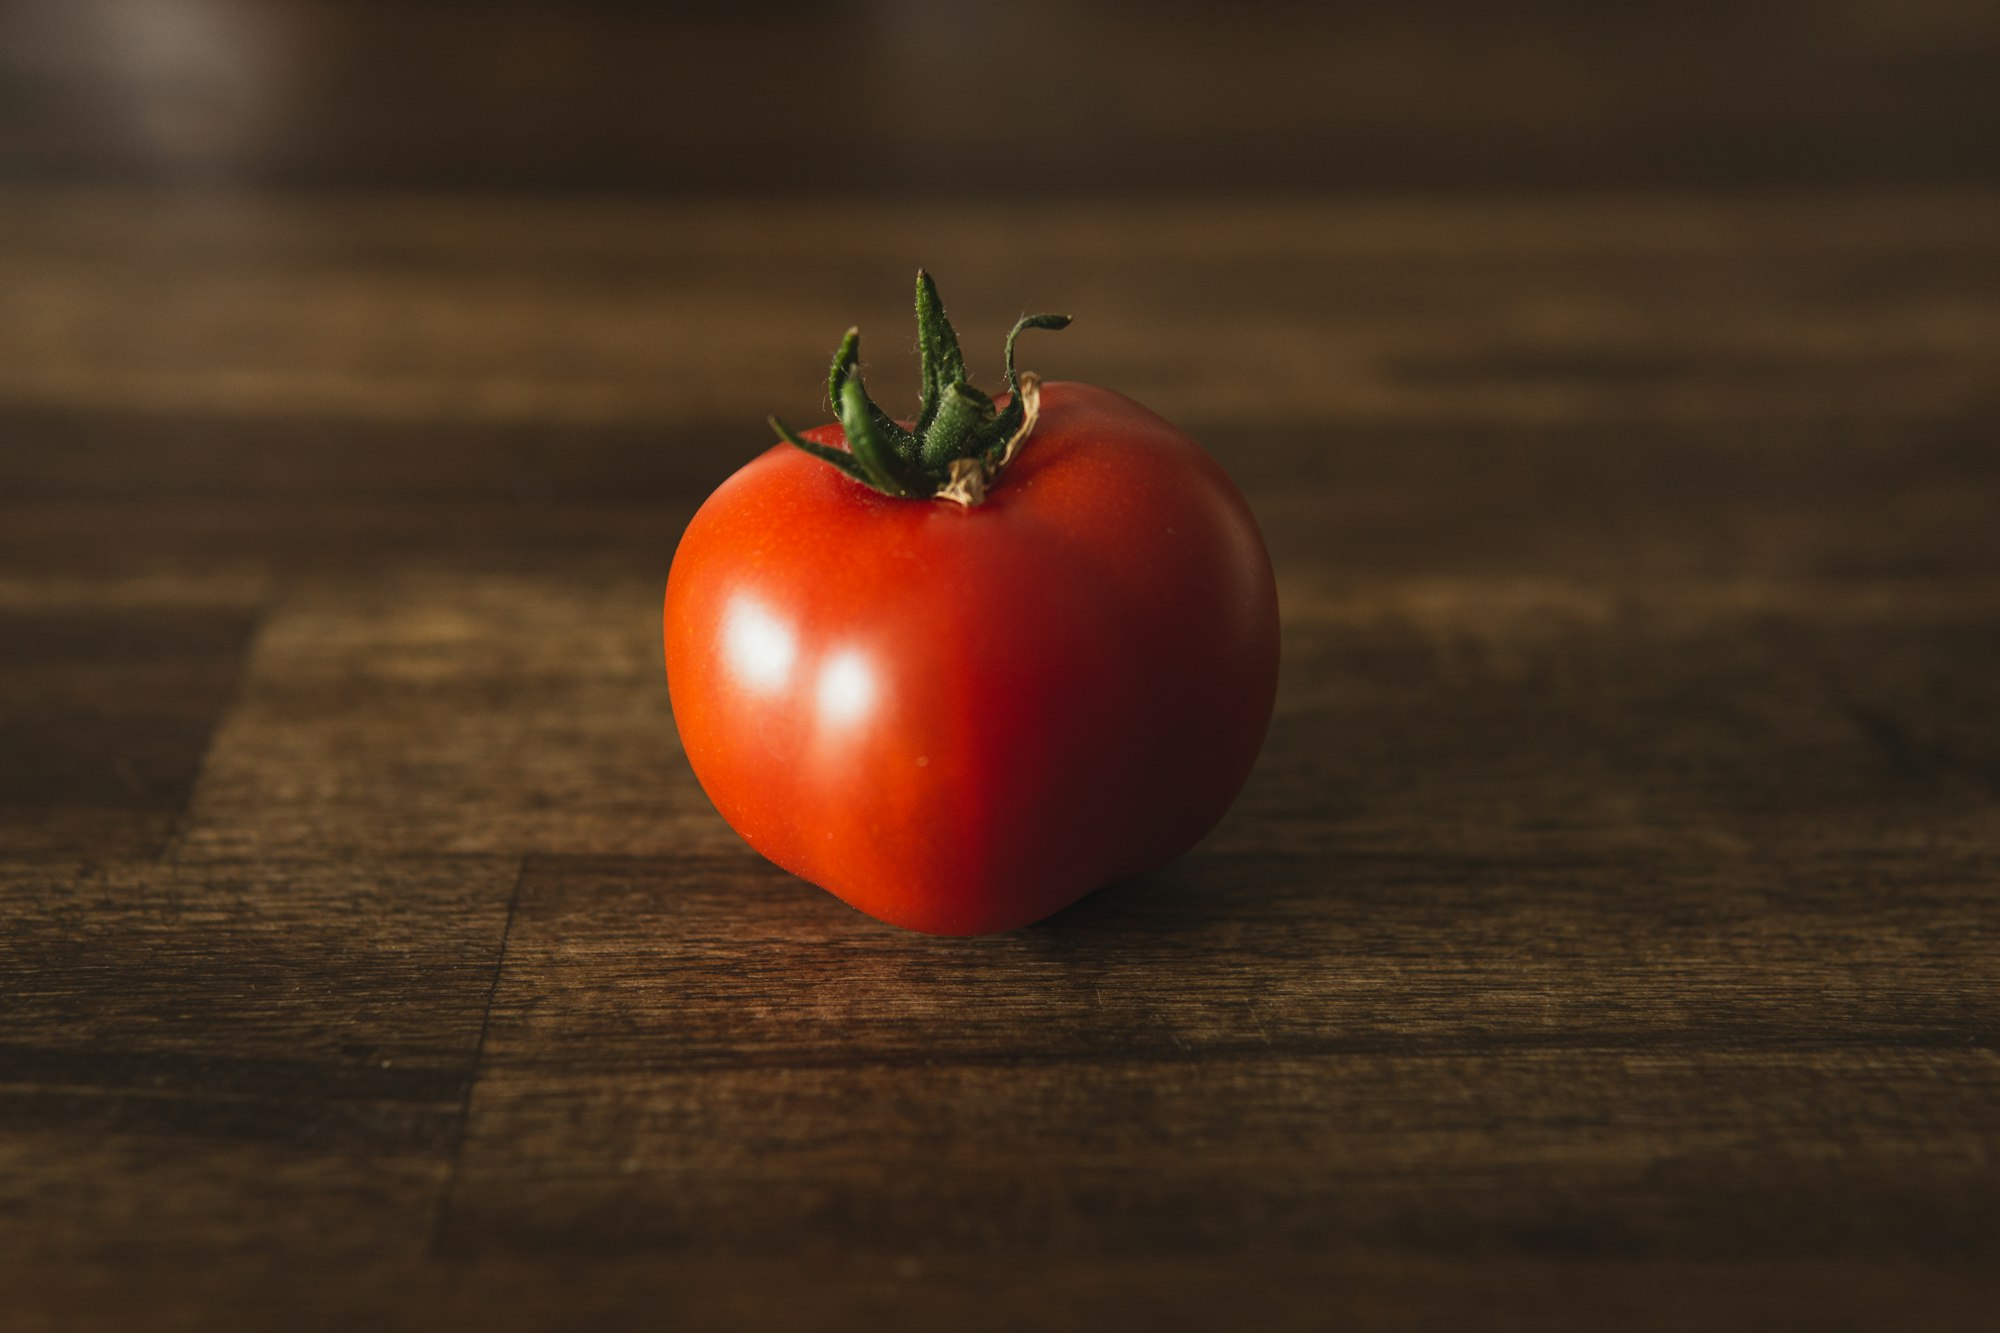 A tomato on wooden surface